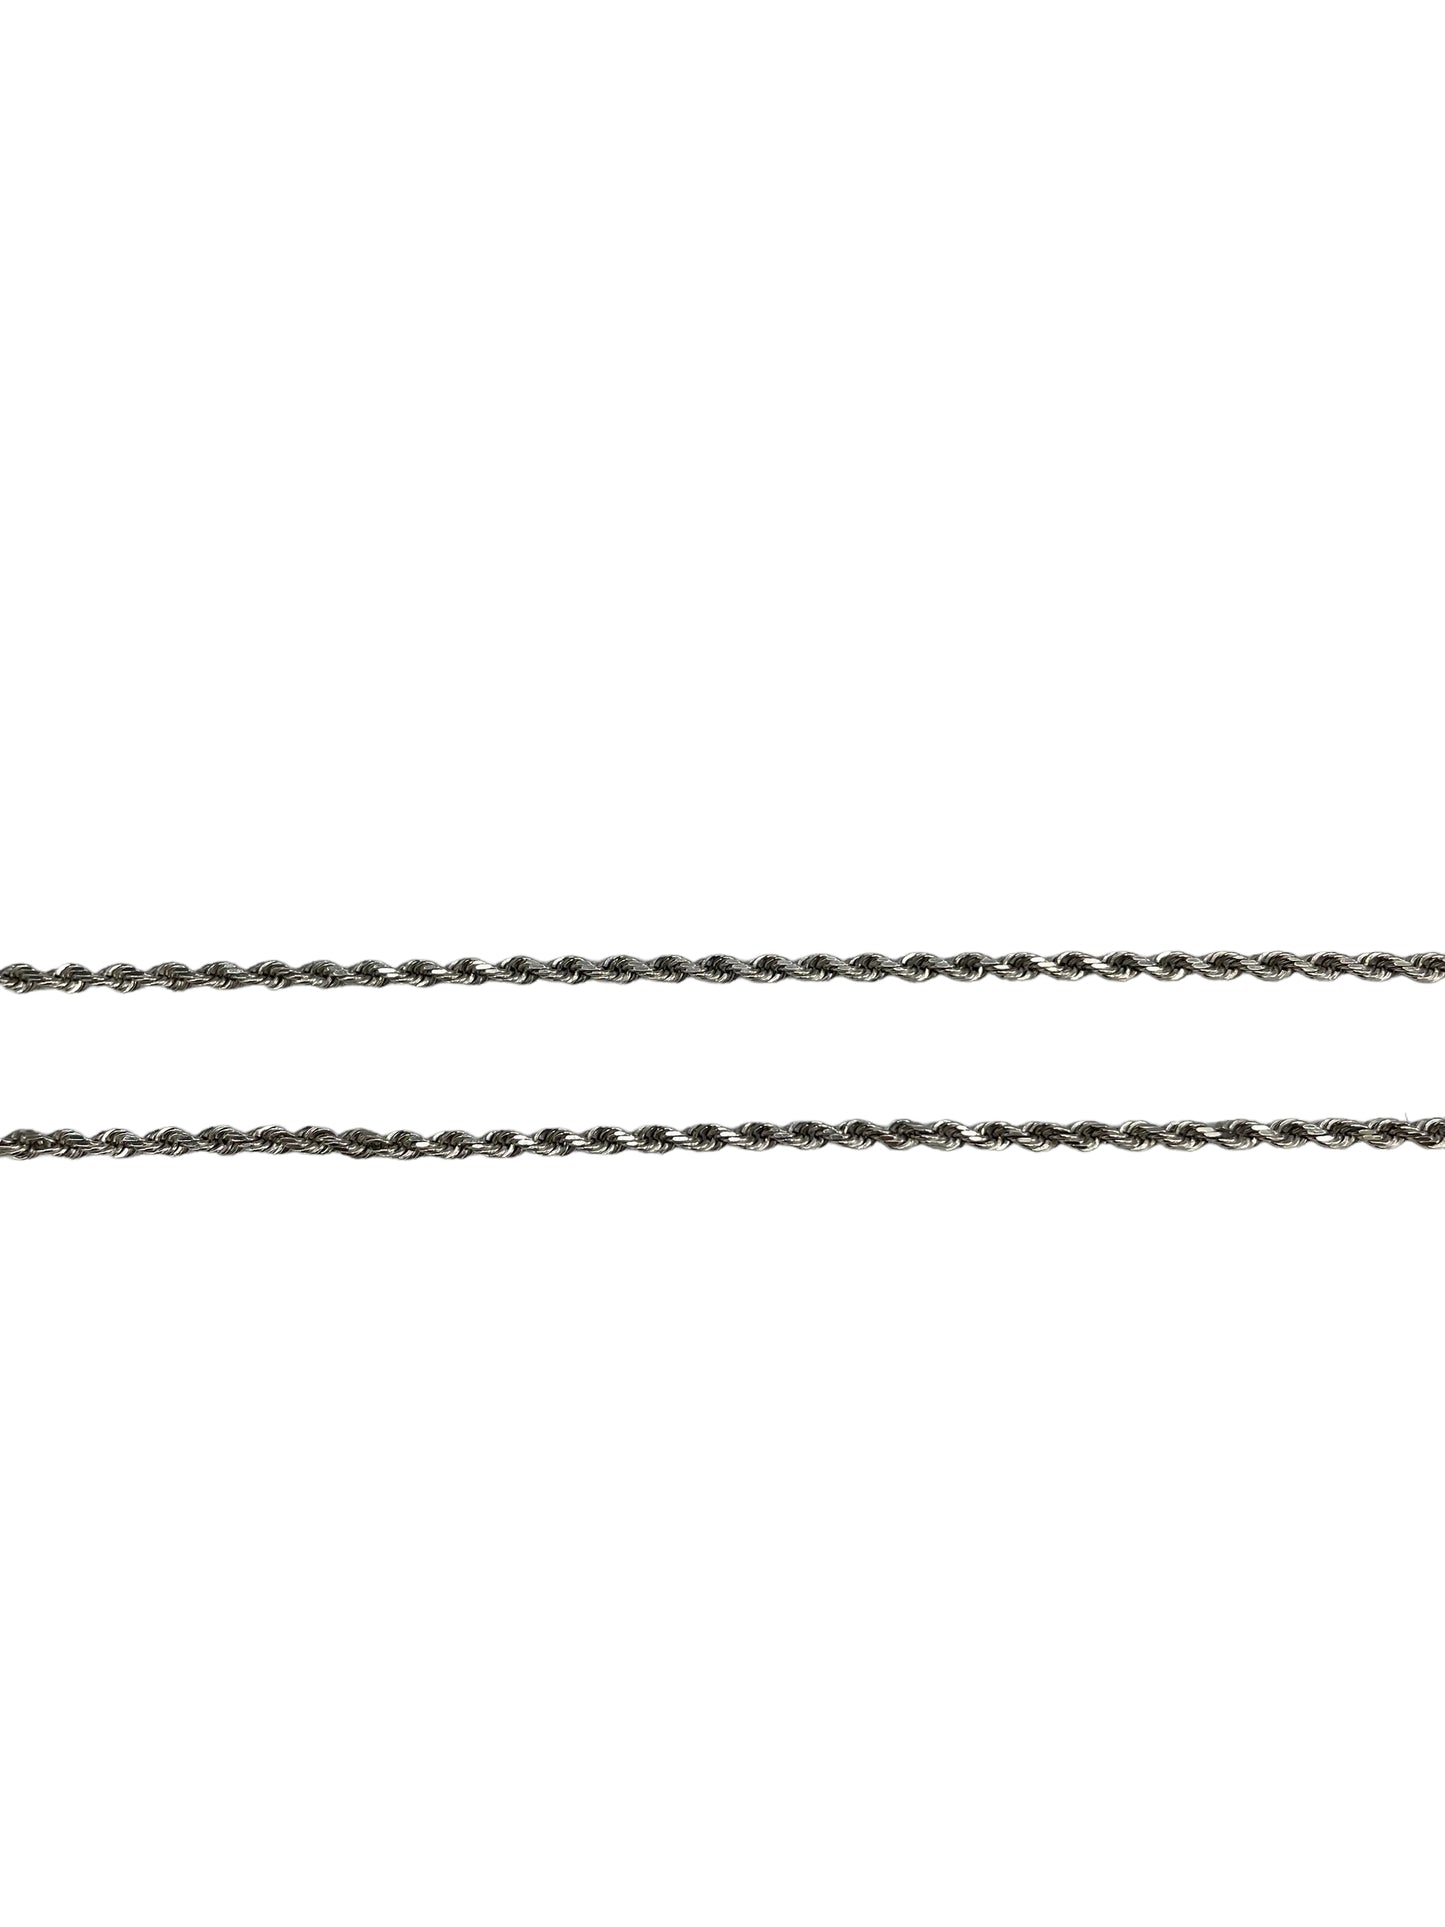 10K White Gold Rope Style Chain (24 Inches)